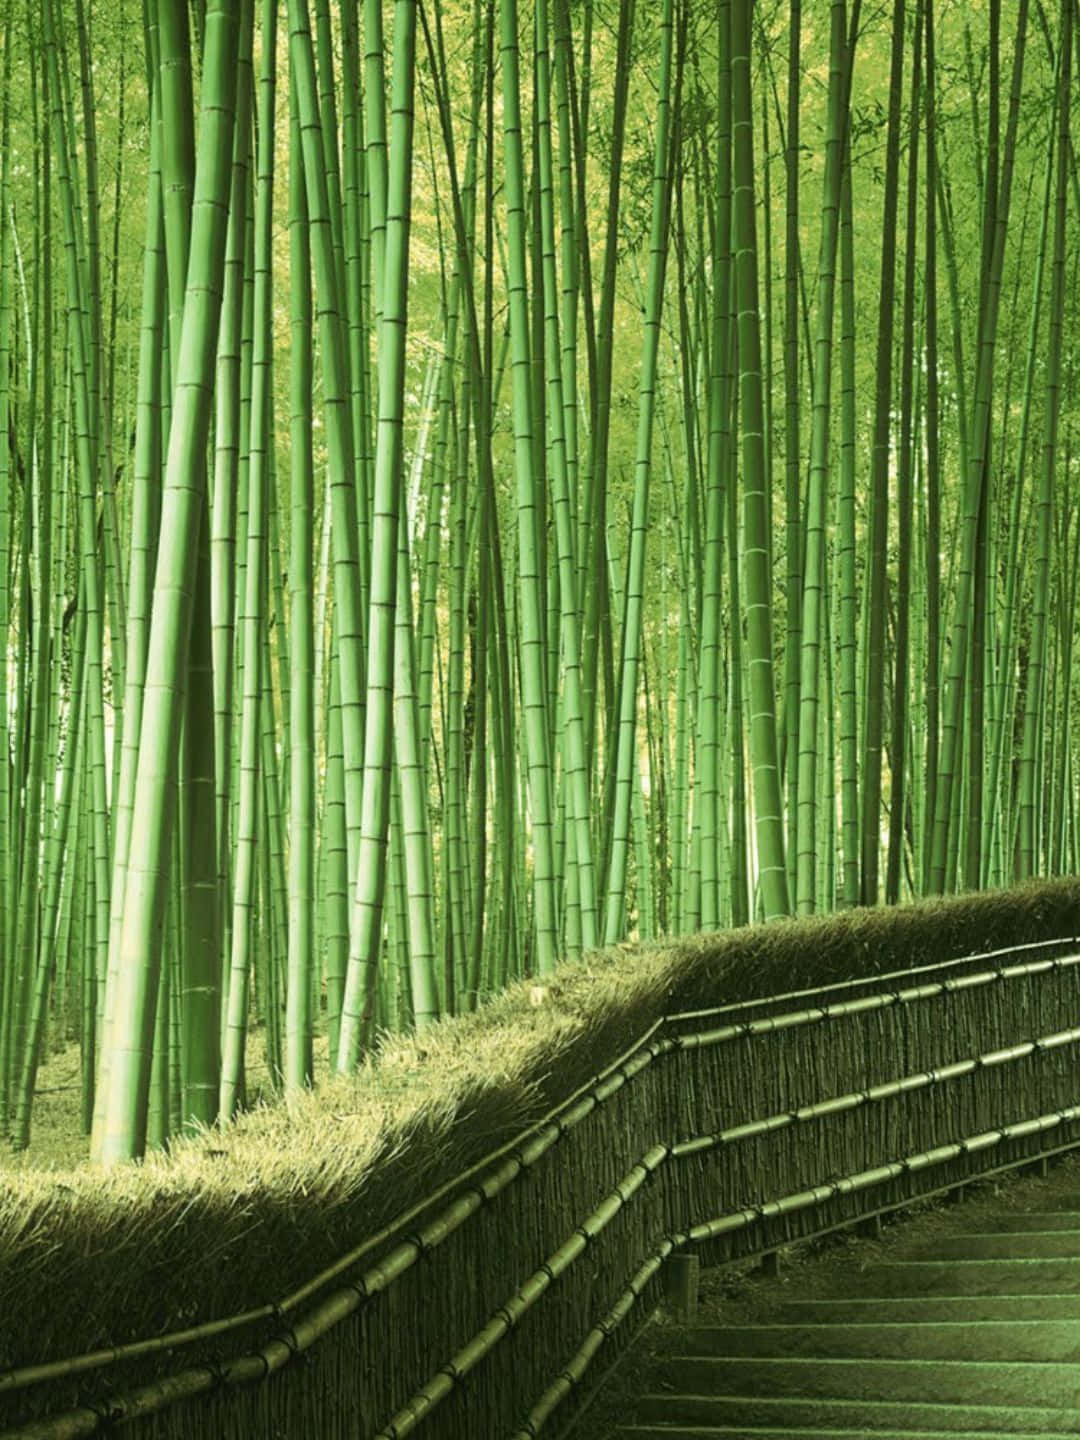 1440p Bamboo Background Staircase